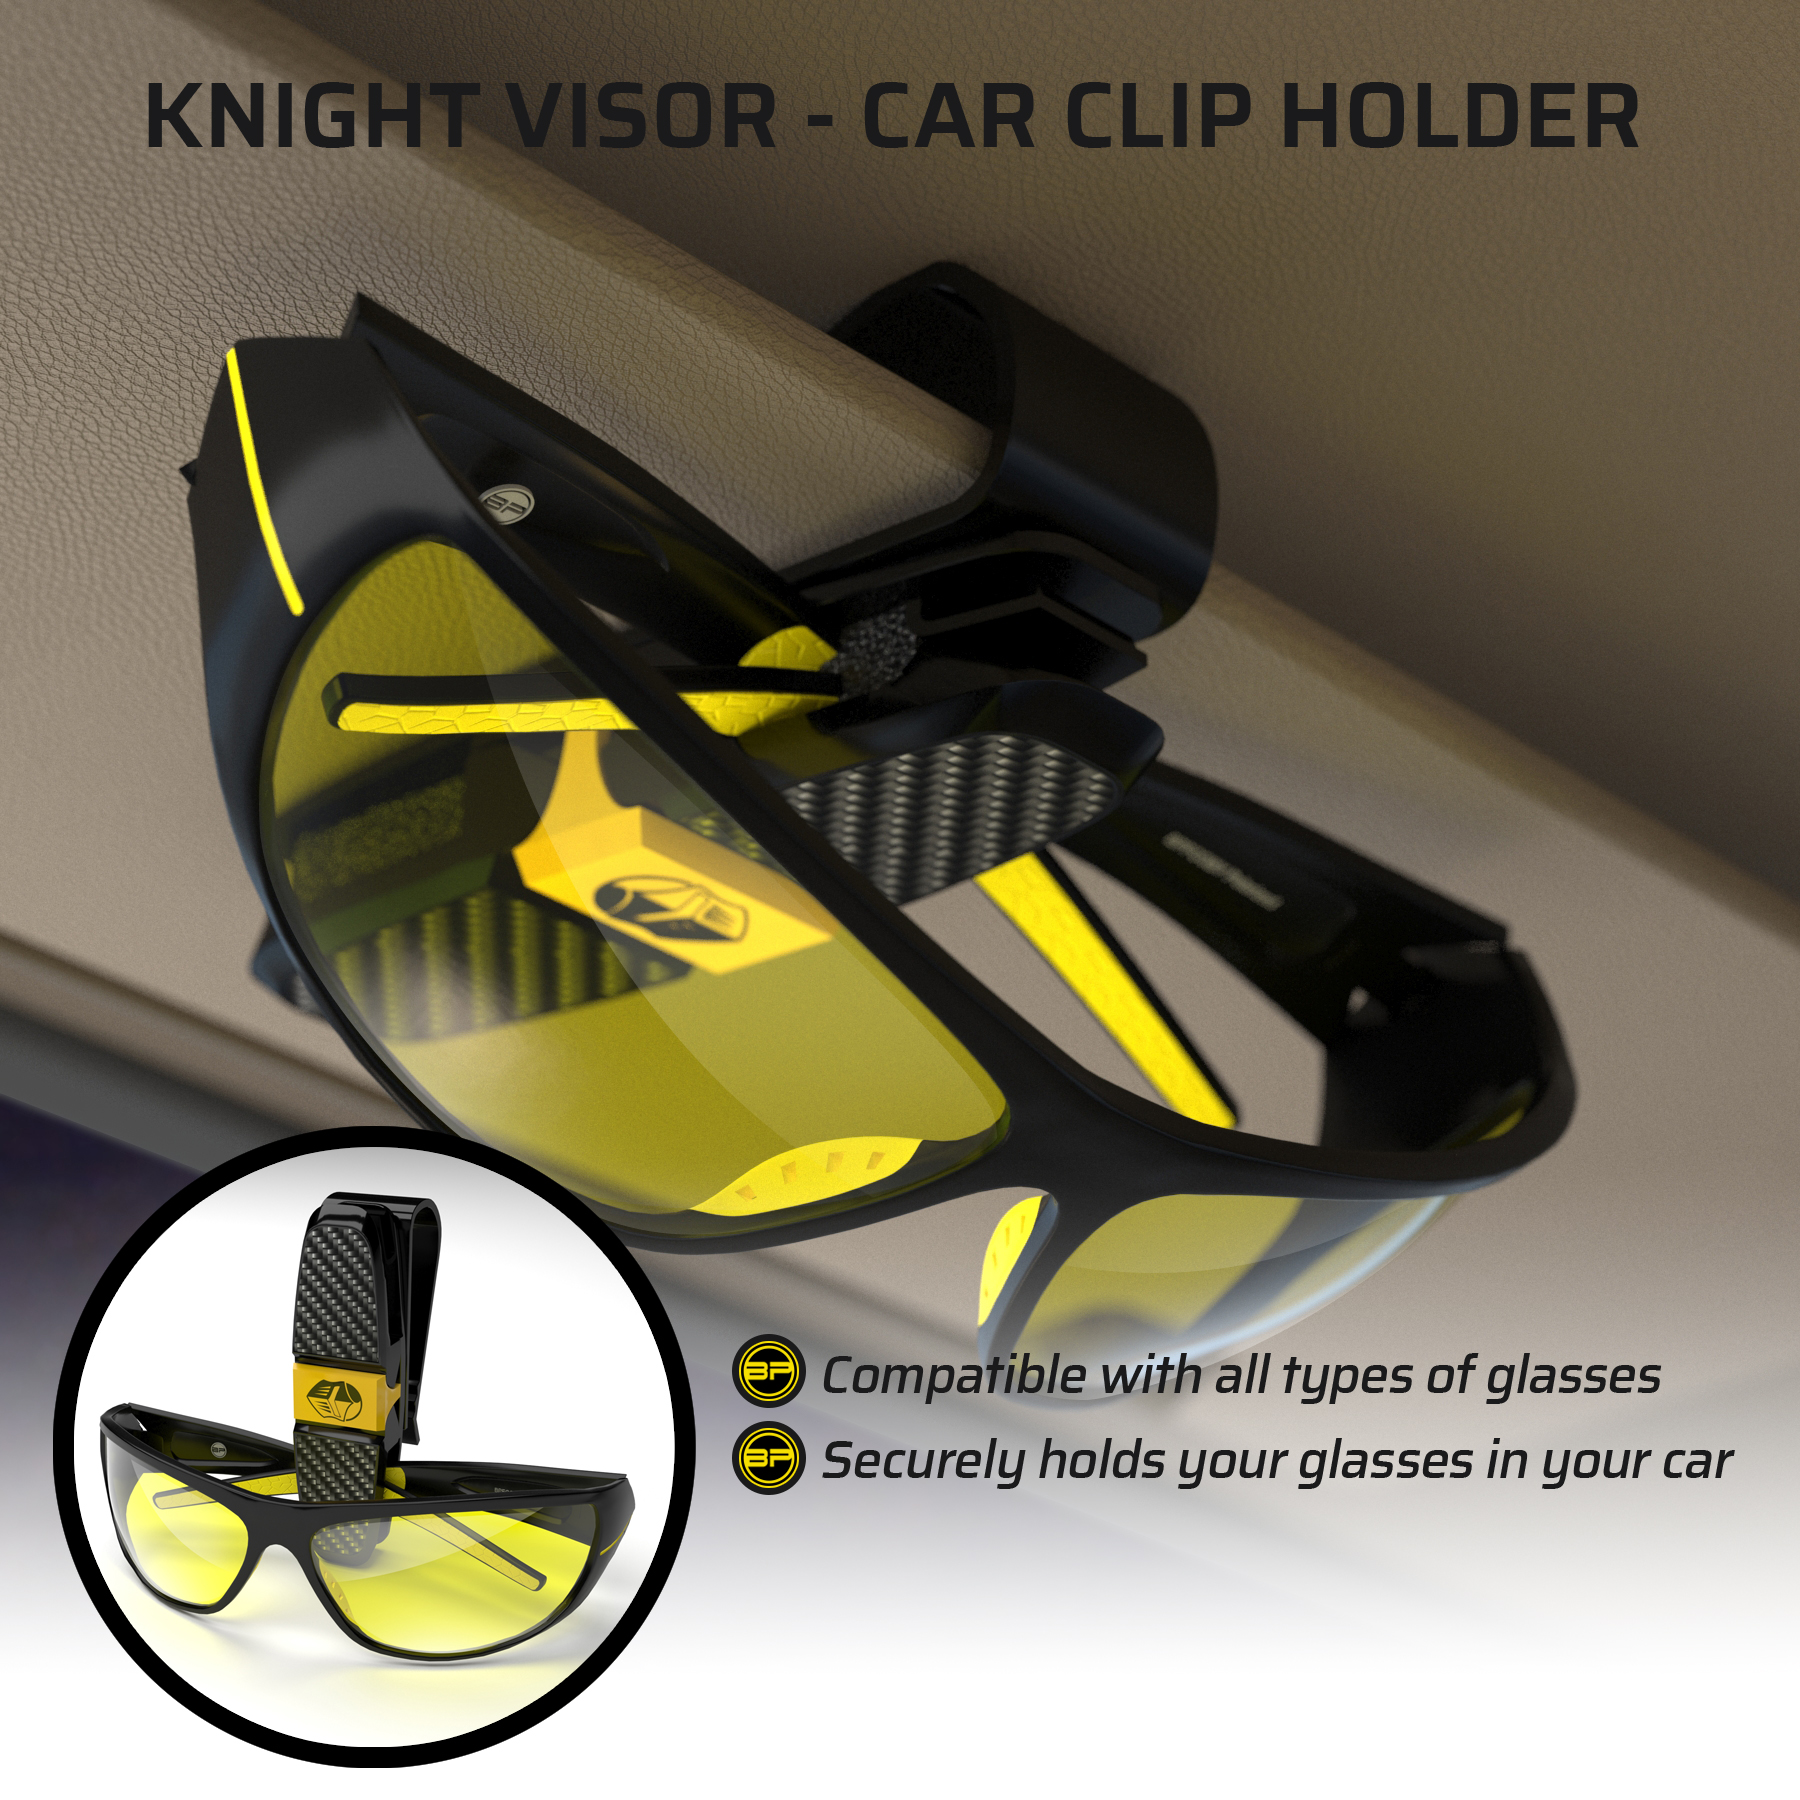 Best Night Driving Glasses - Knight Visor by BLUPOND